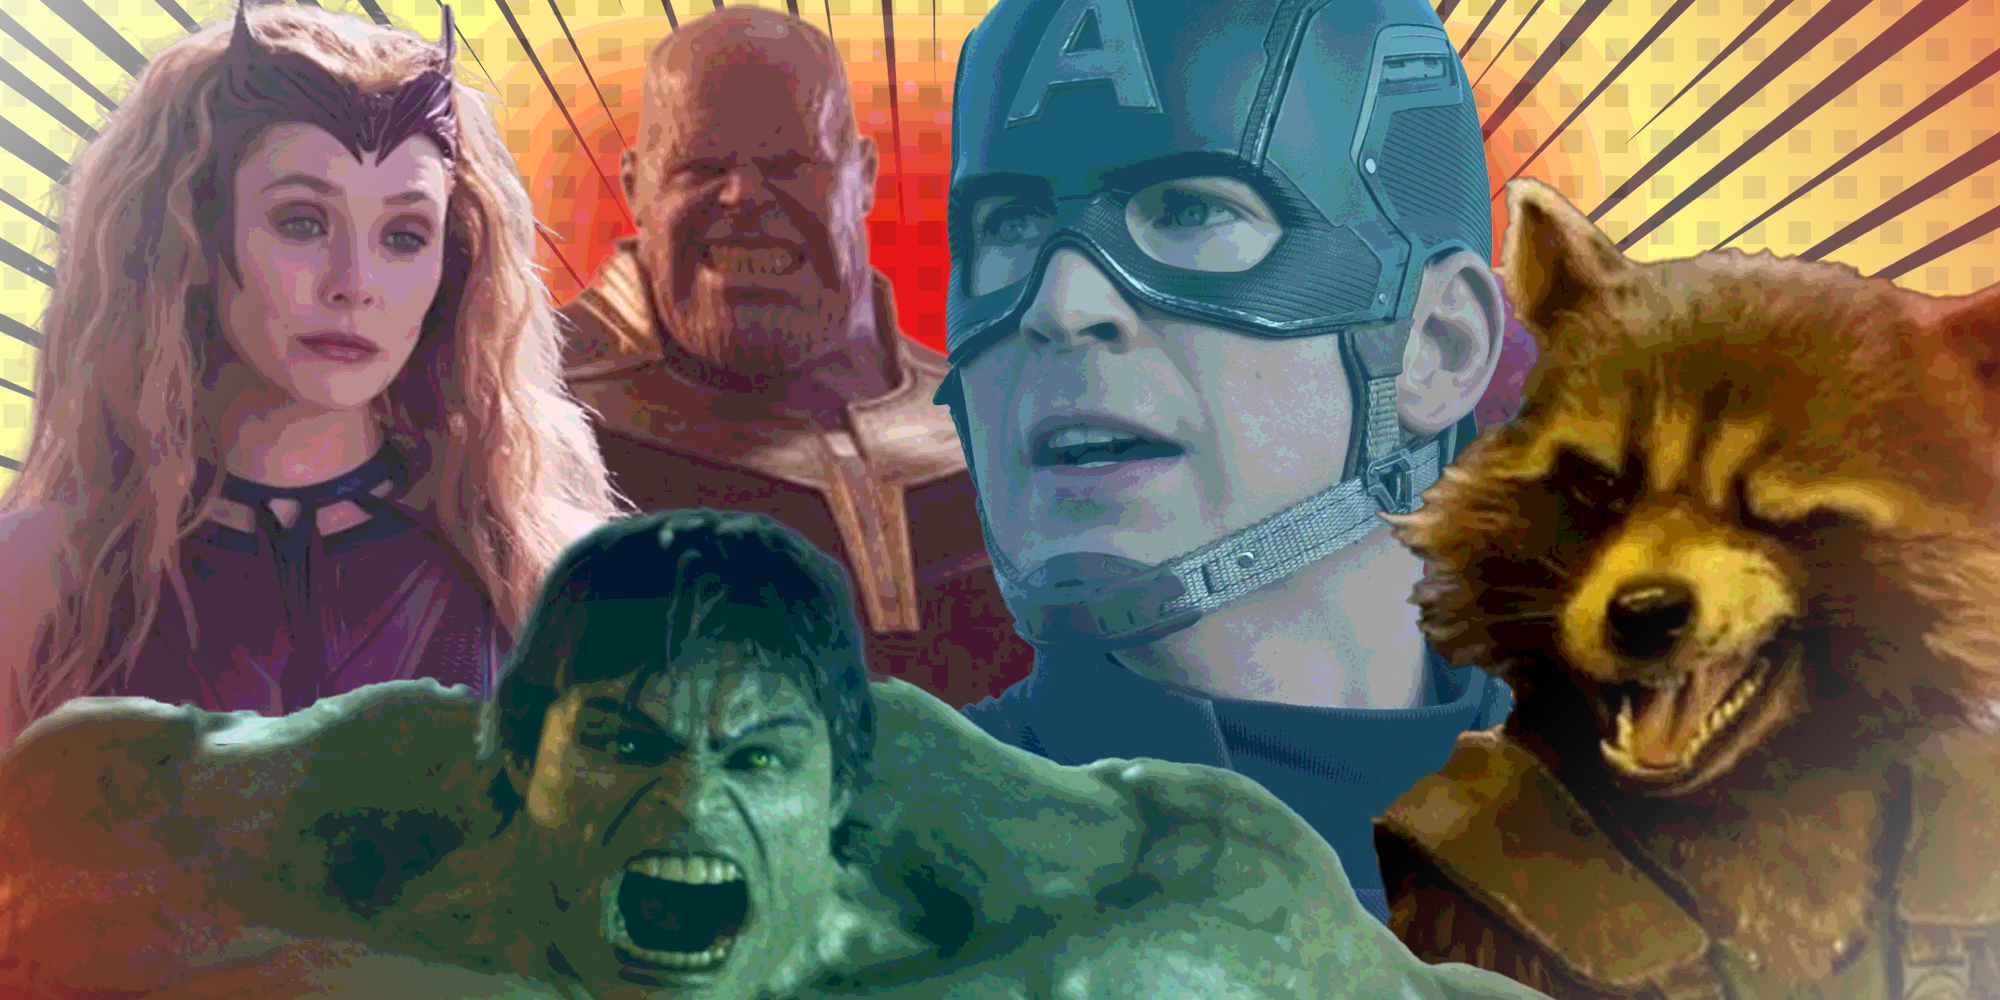 The Biggest Movie Ever, Avengers: Endgame Is Coming to Your